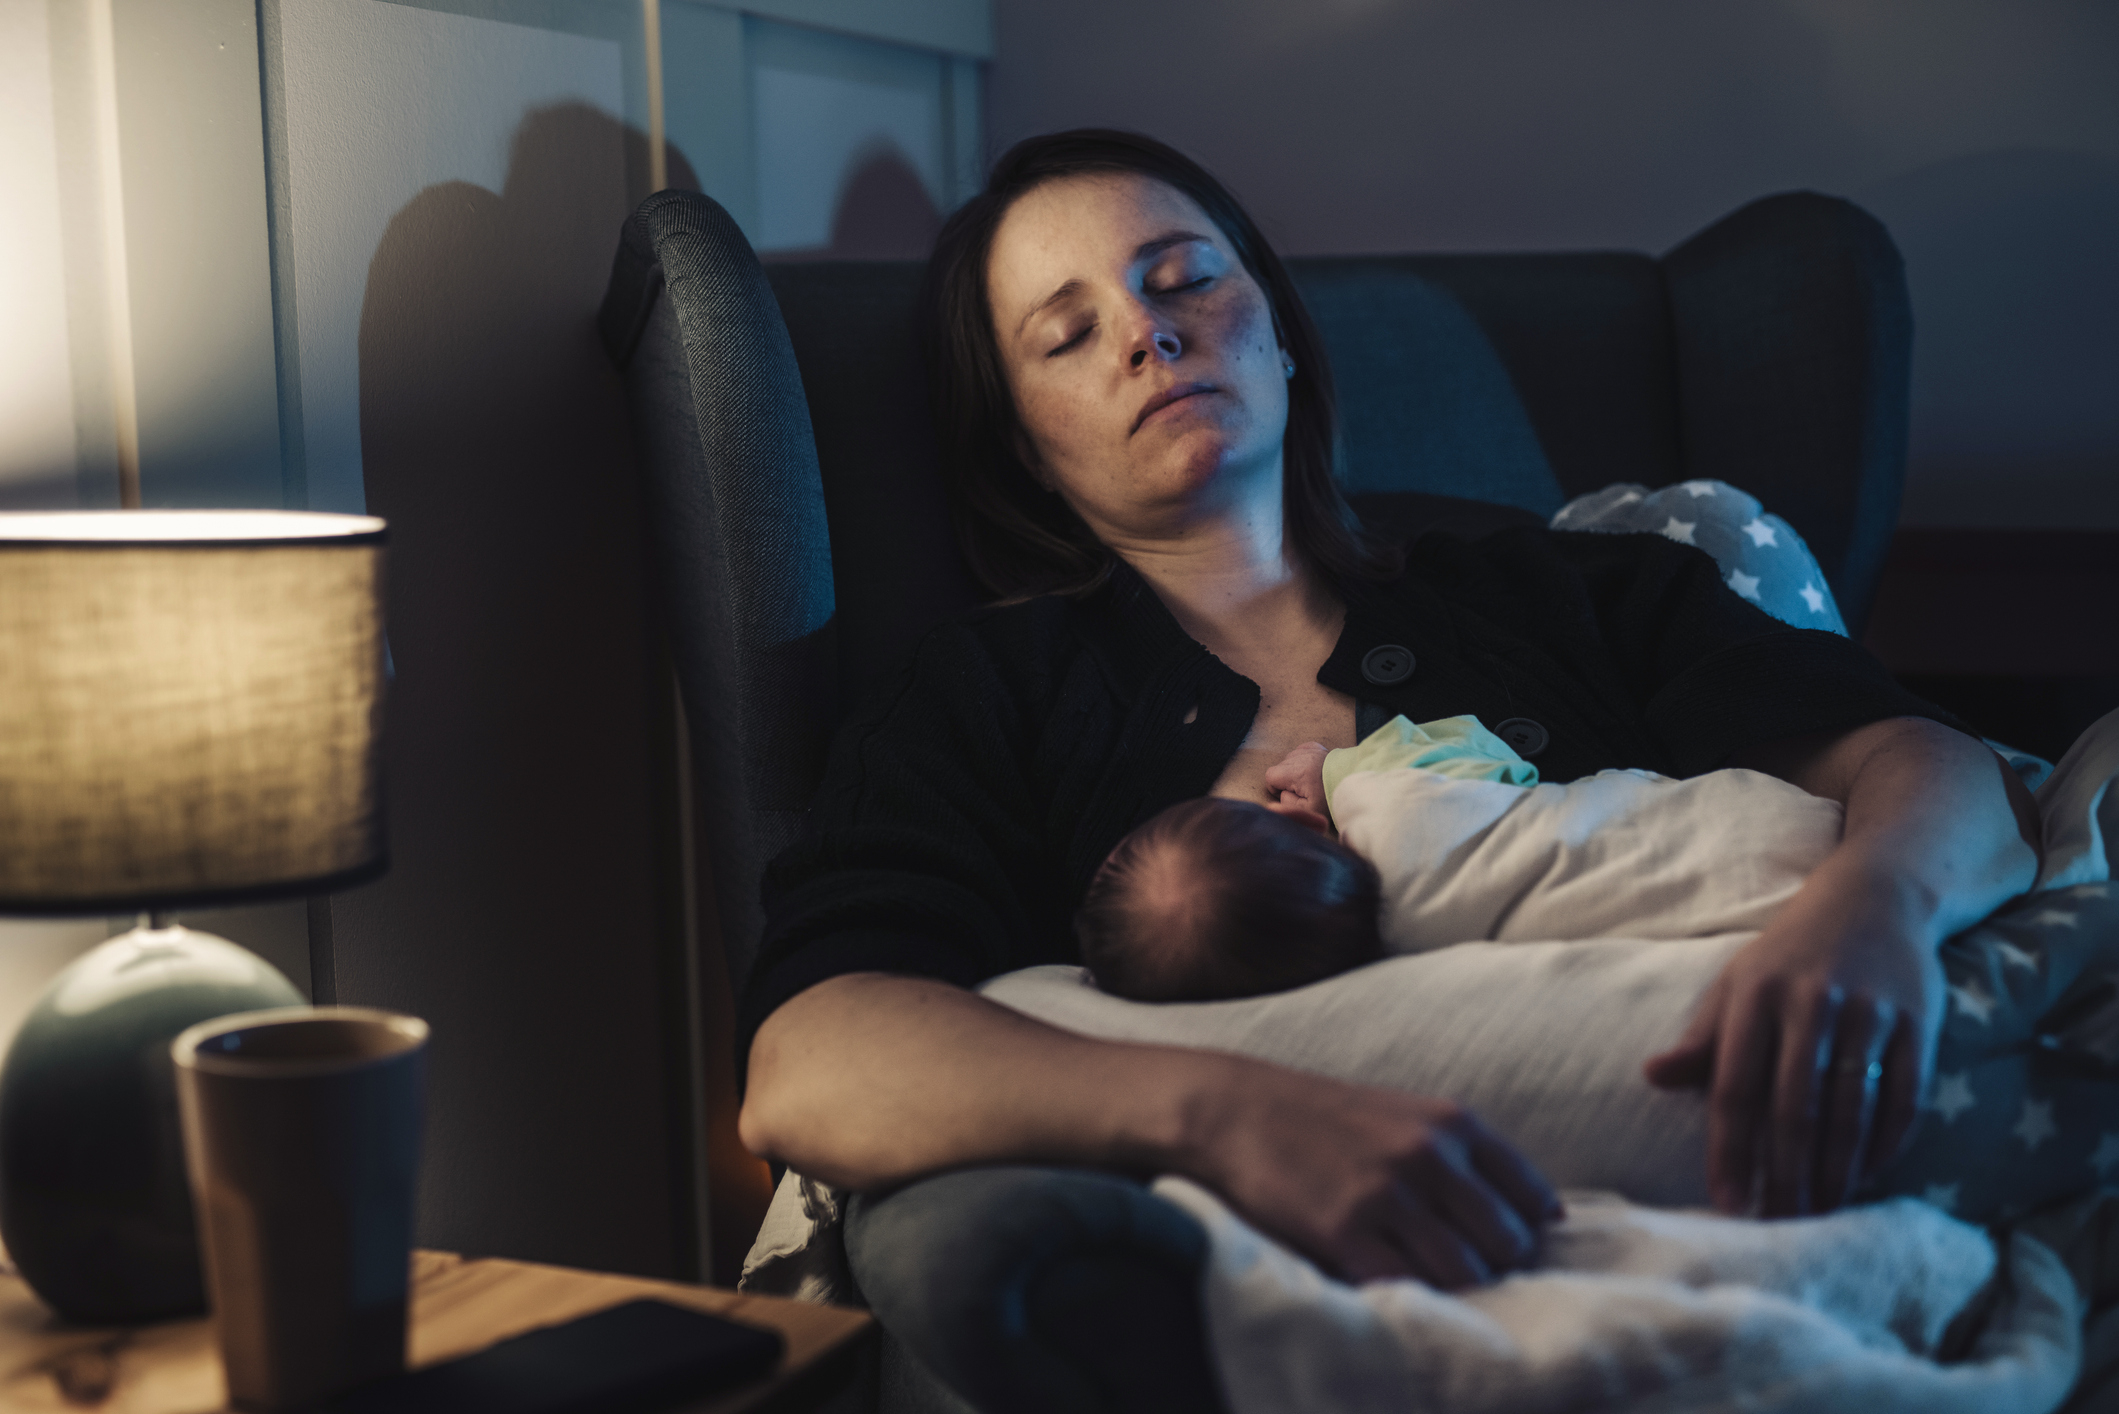 A tired mother with her sleeping baby resting on her chest in a dimly lit room, conveying a moment of parental care